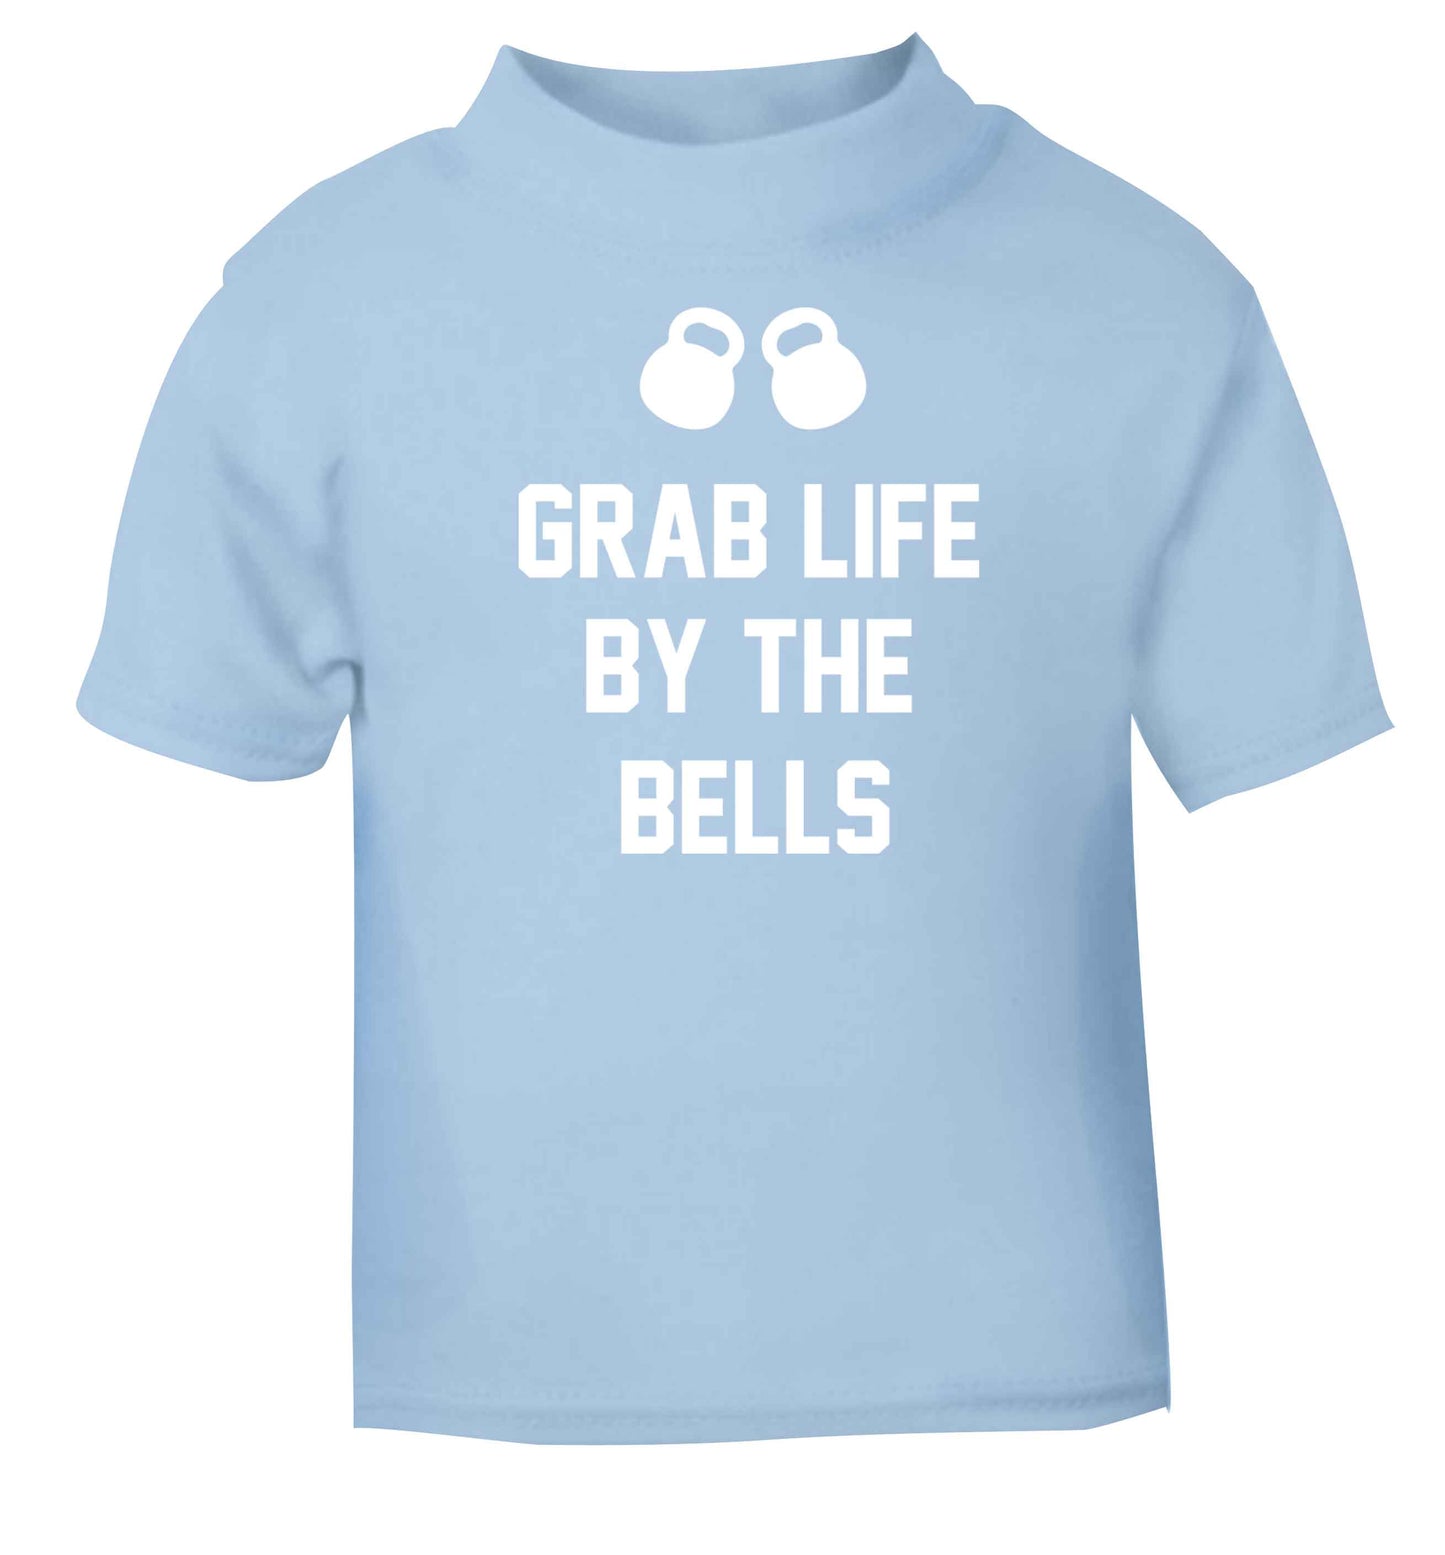 Grab life by the bells light blue baby toddler Tshirt 2 Years